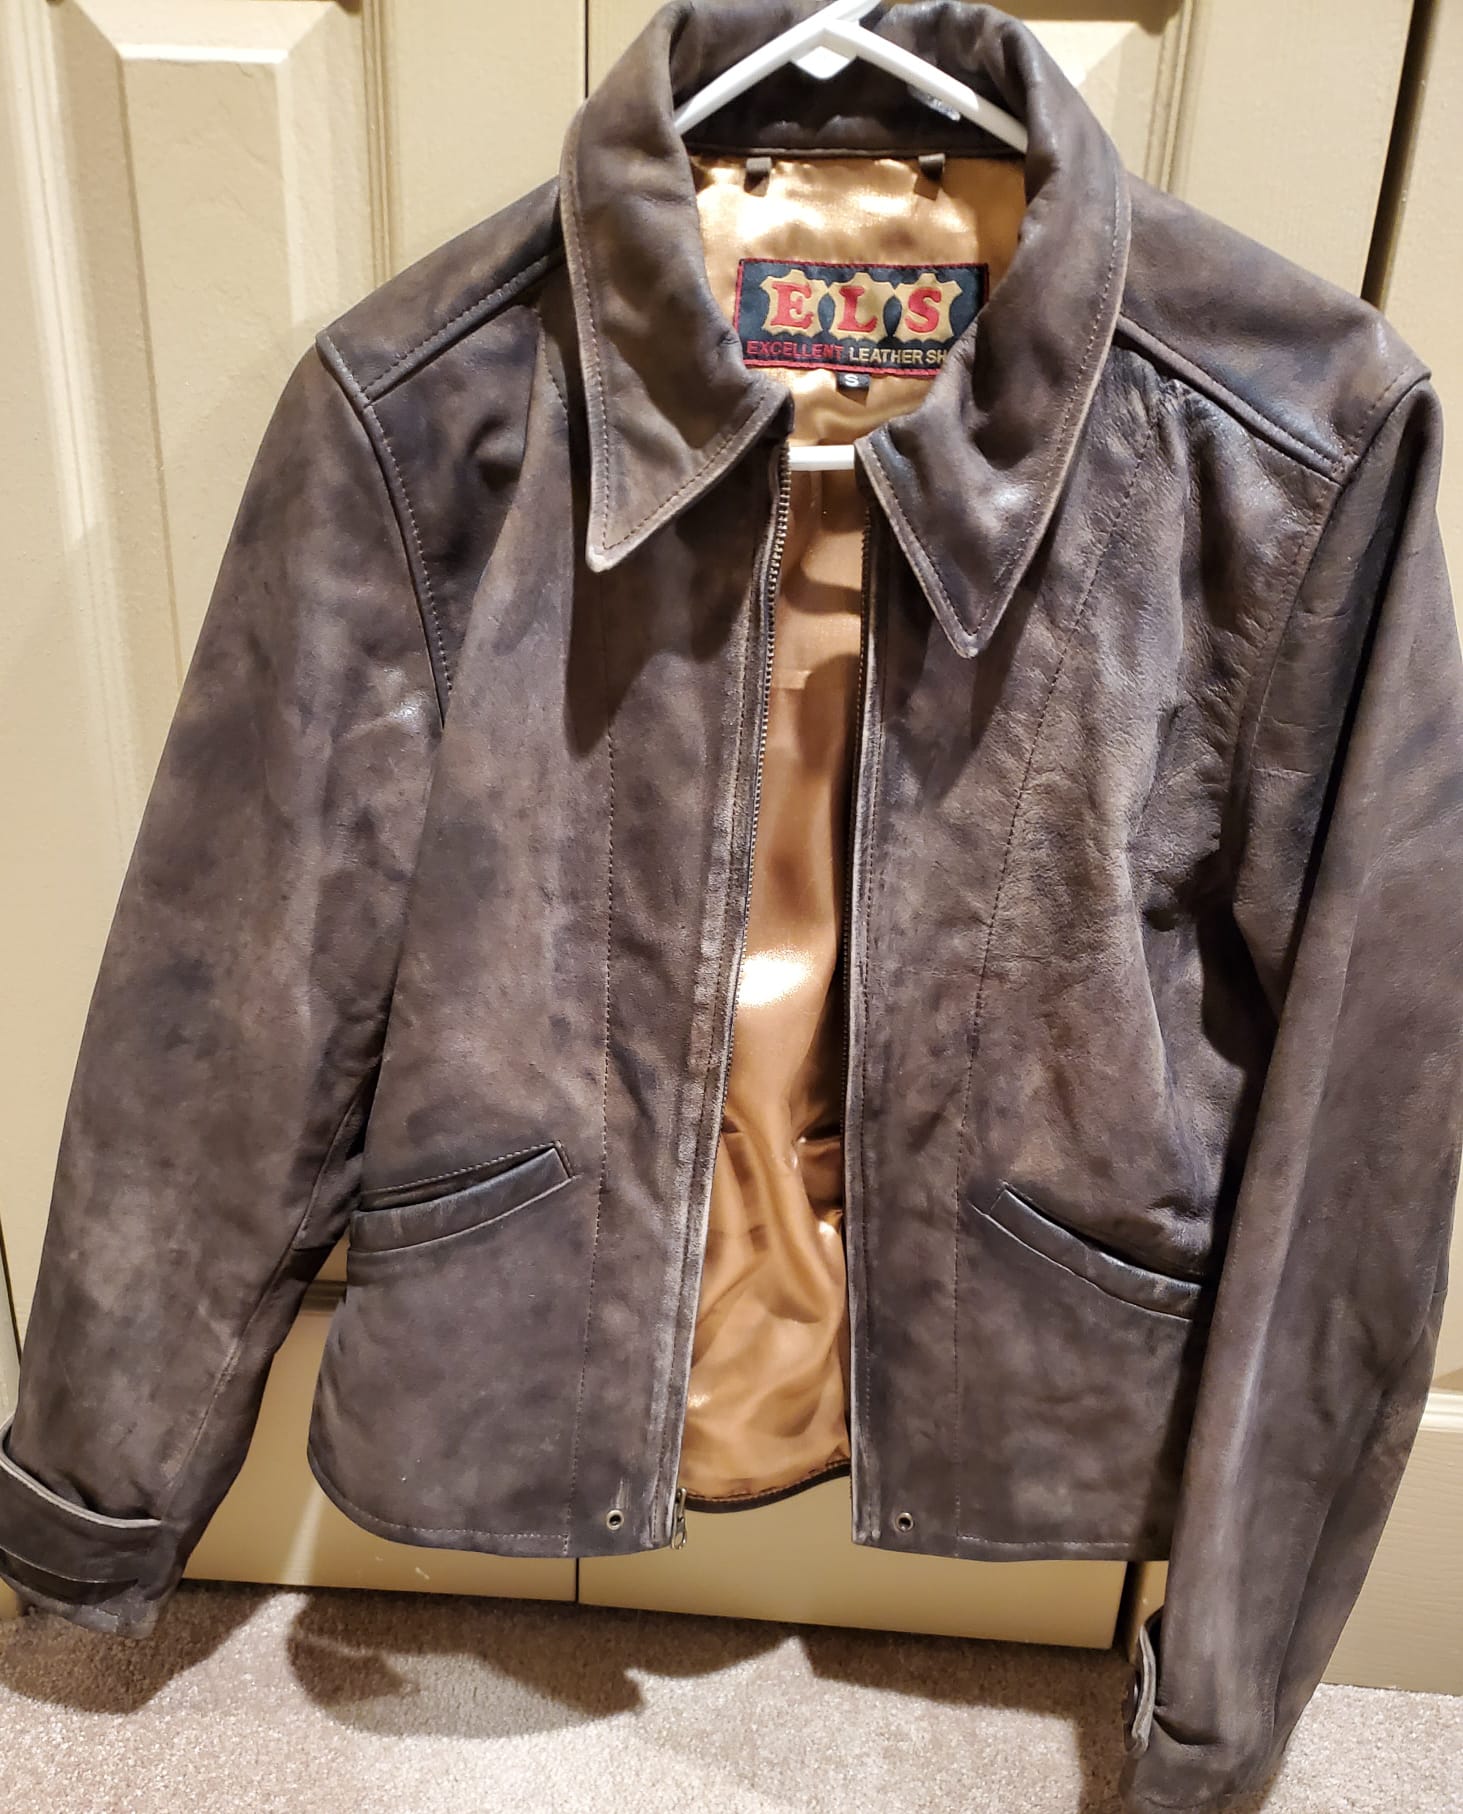 Unlimited Run - The Skyfall Levi's Vintage Clothing Menlo Leather Jacket! |  RPF Costume and Prop Maker Community